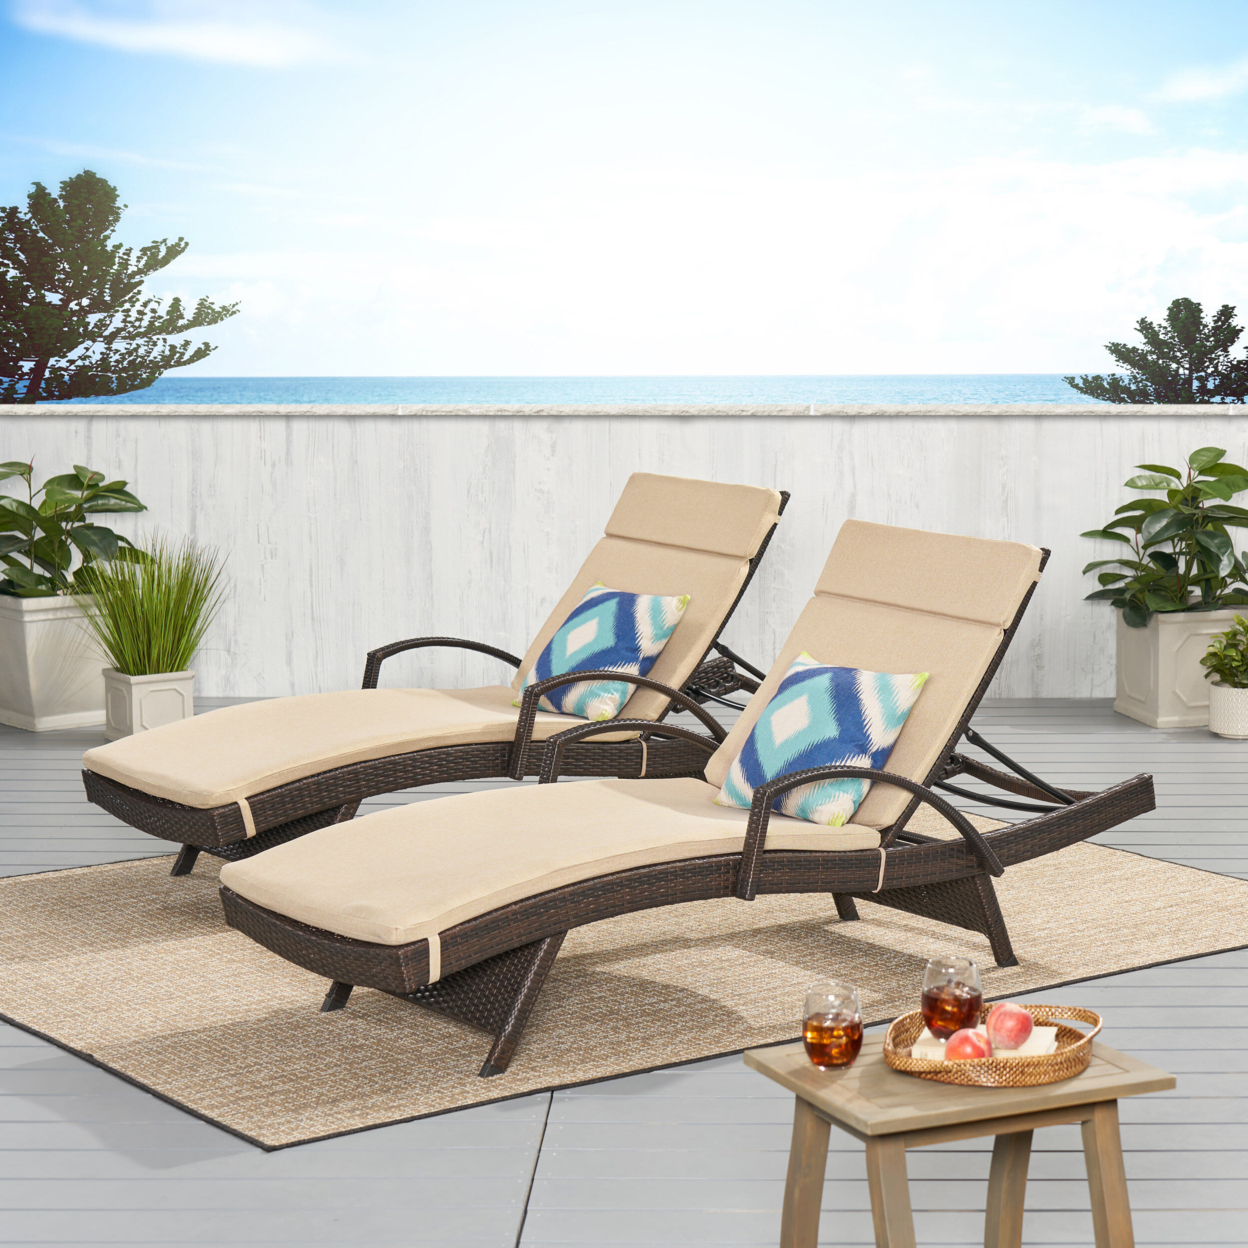 Lakeport Outdoor Wicker Armed Chaise Lounge Chairs With Cushions (set Of 2) - Beige